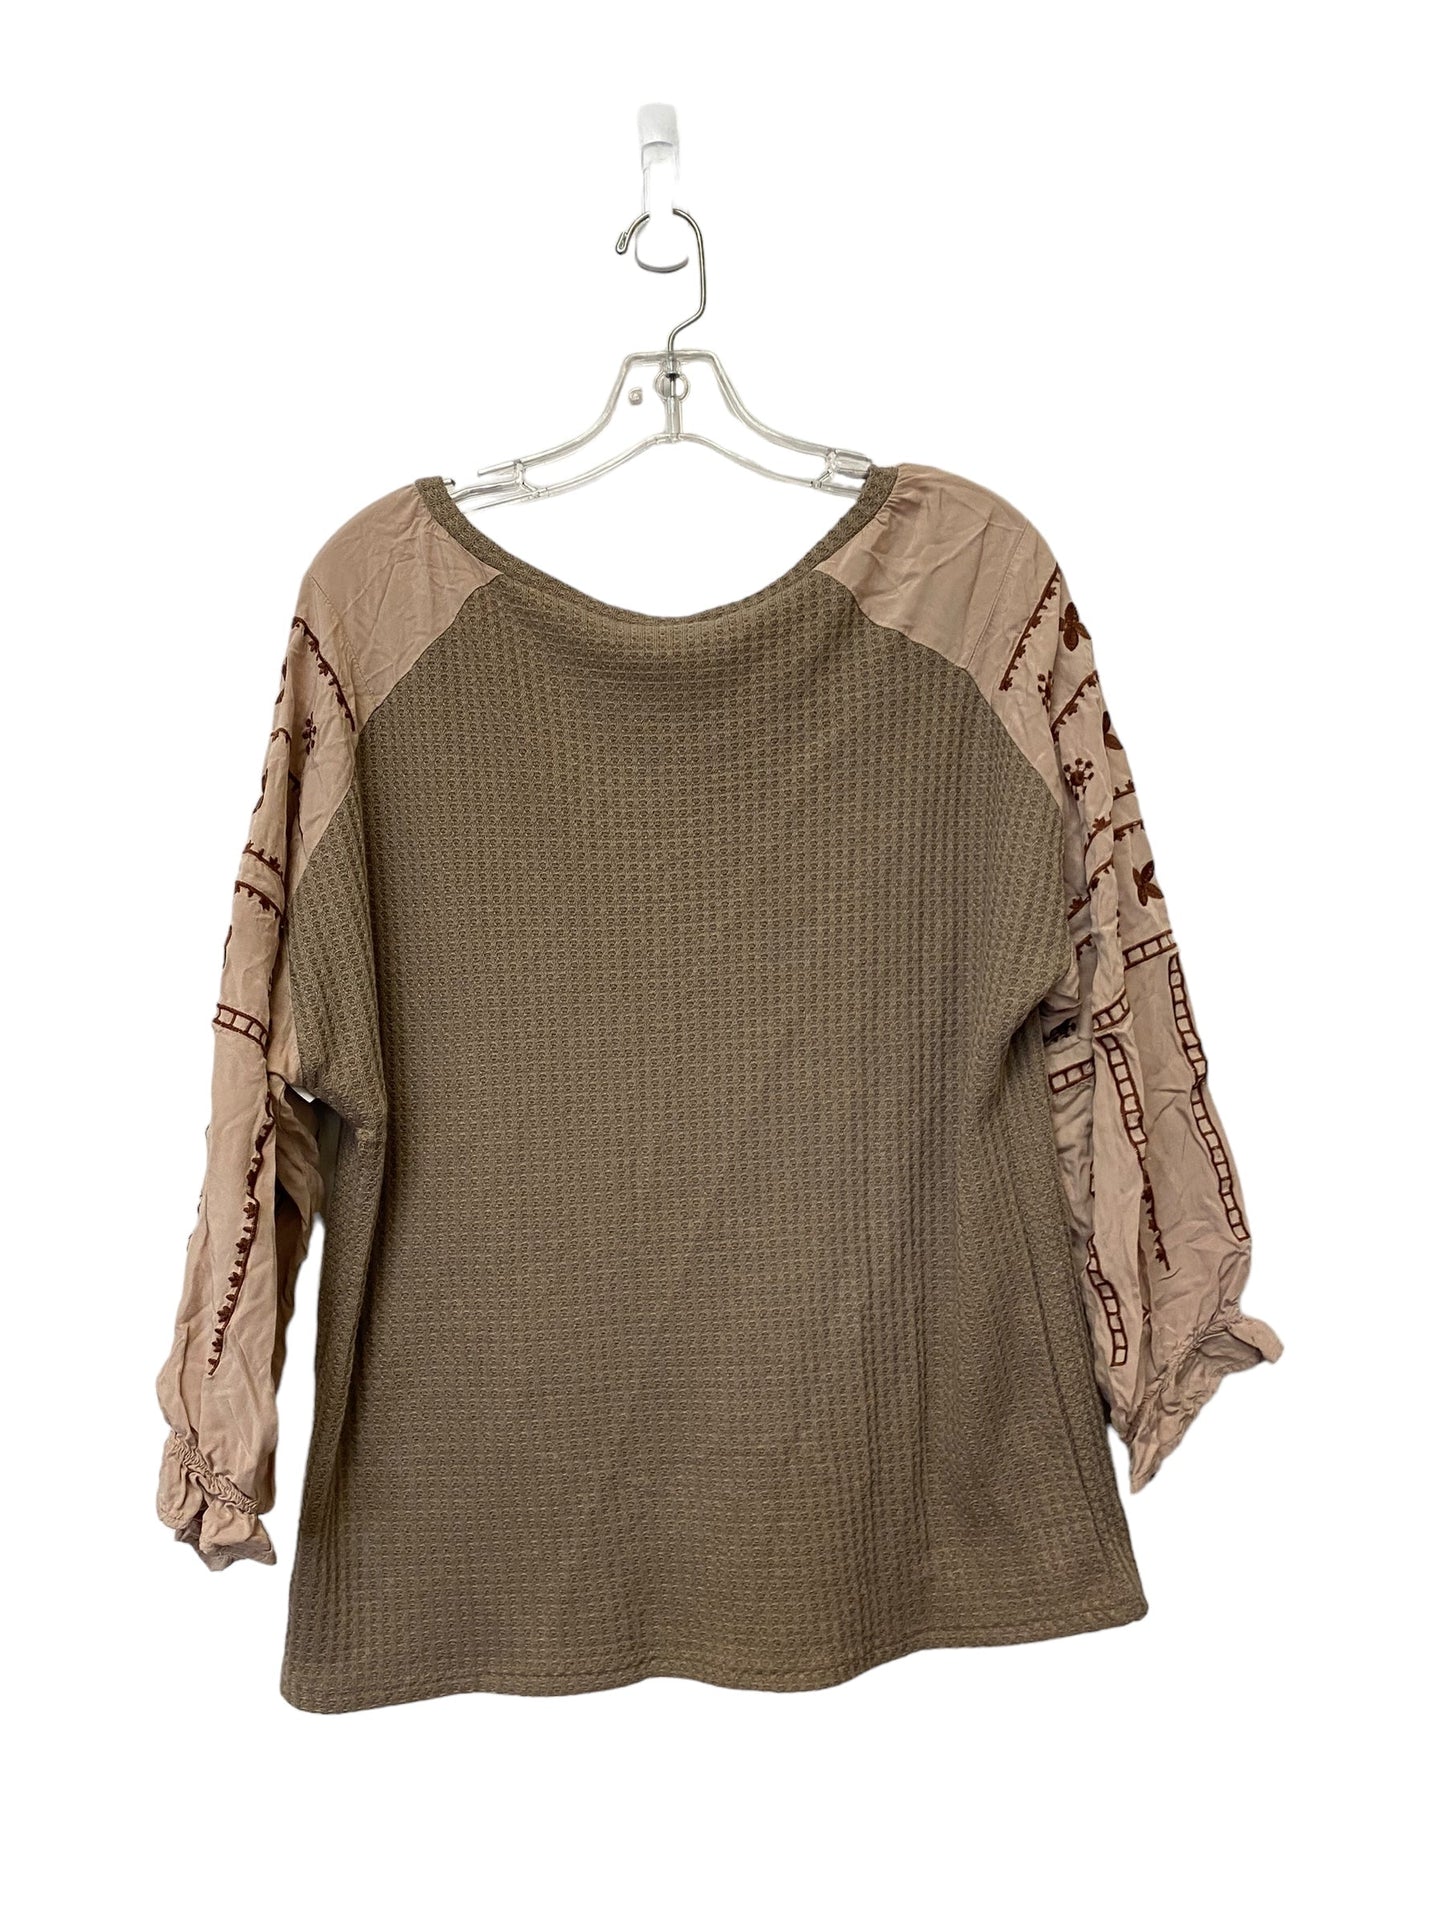 Bronze Top Long Sleeve Clothes Mentor, Size L